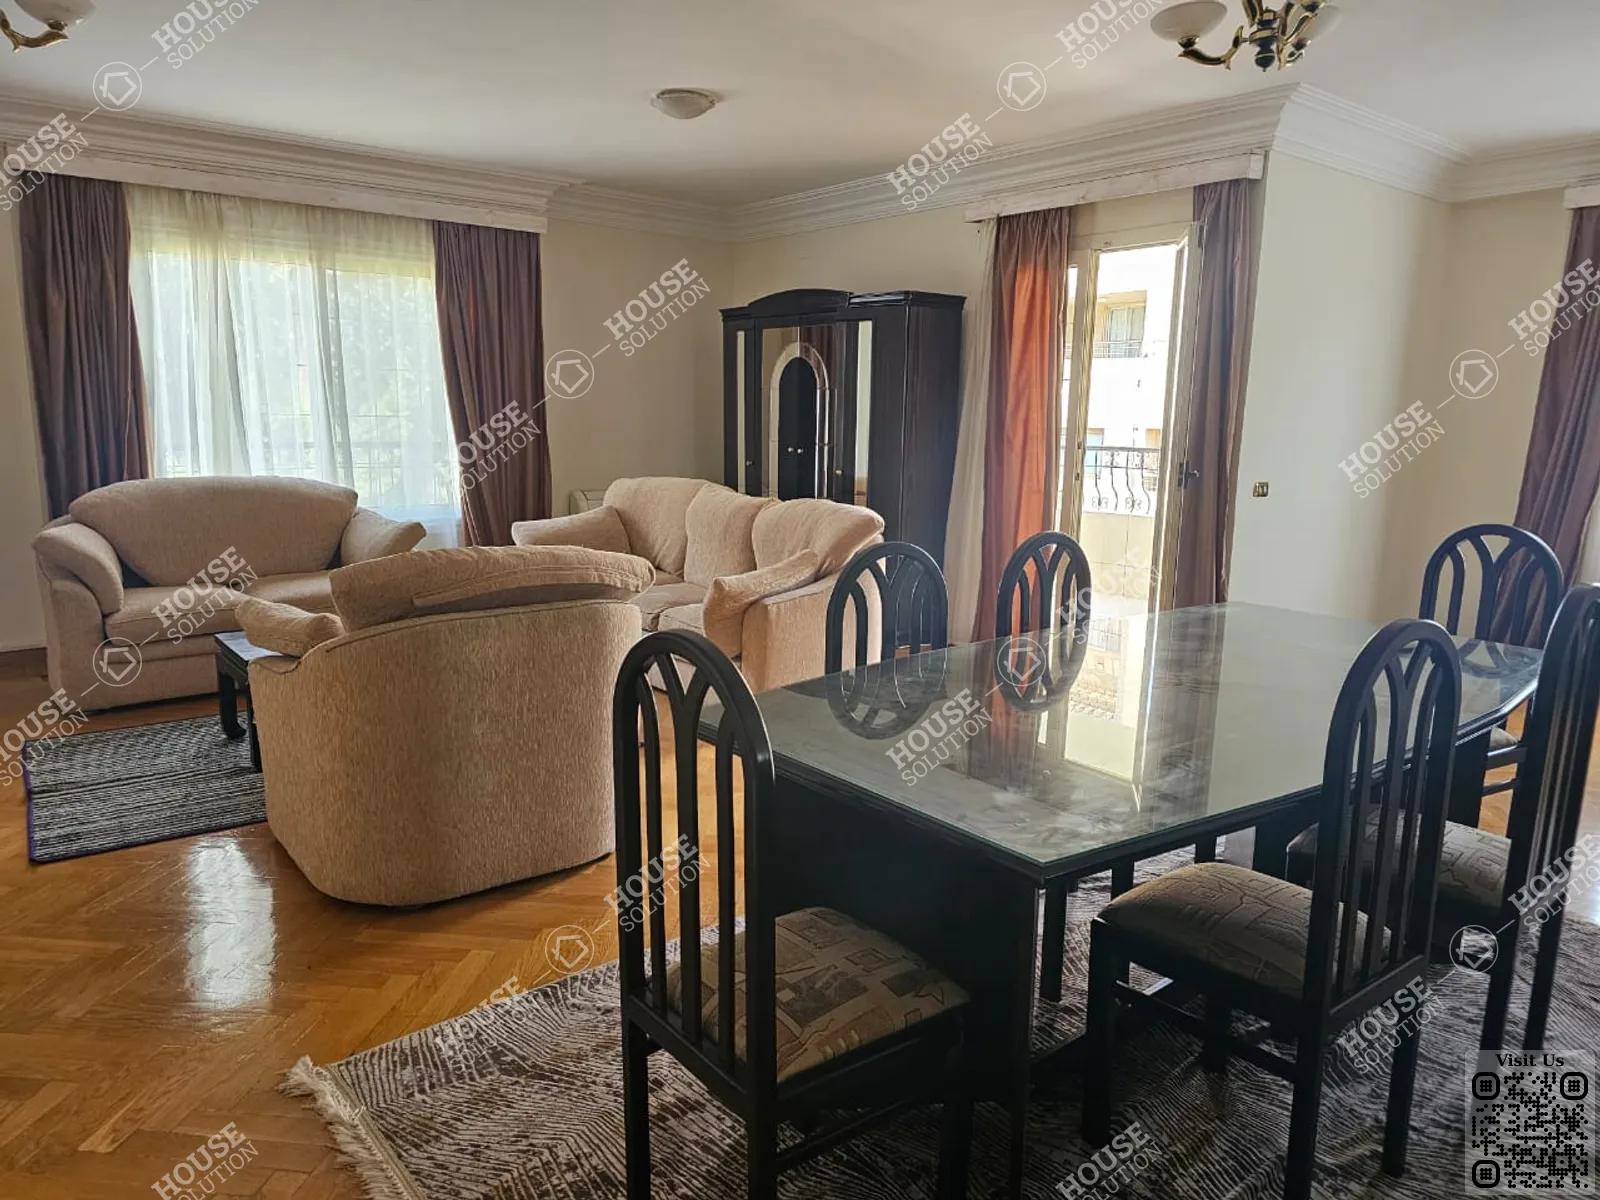 RECEPTION  @ Apartments For Rent In Maadi Maadi Degla Area: 240 m² consists of 3 Bedrooms 3 Bathrooms Modern furnished 5 stars #4991-0